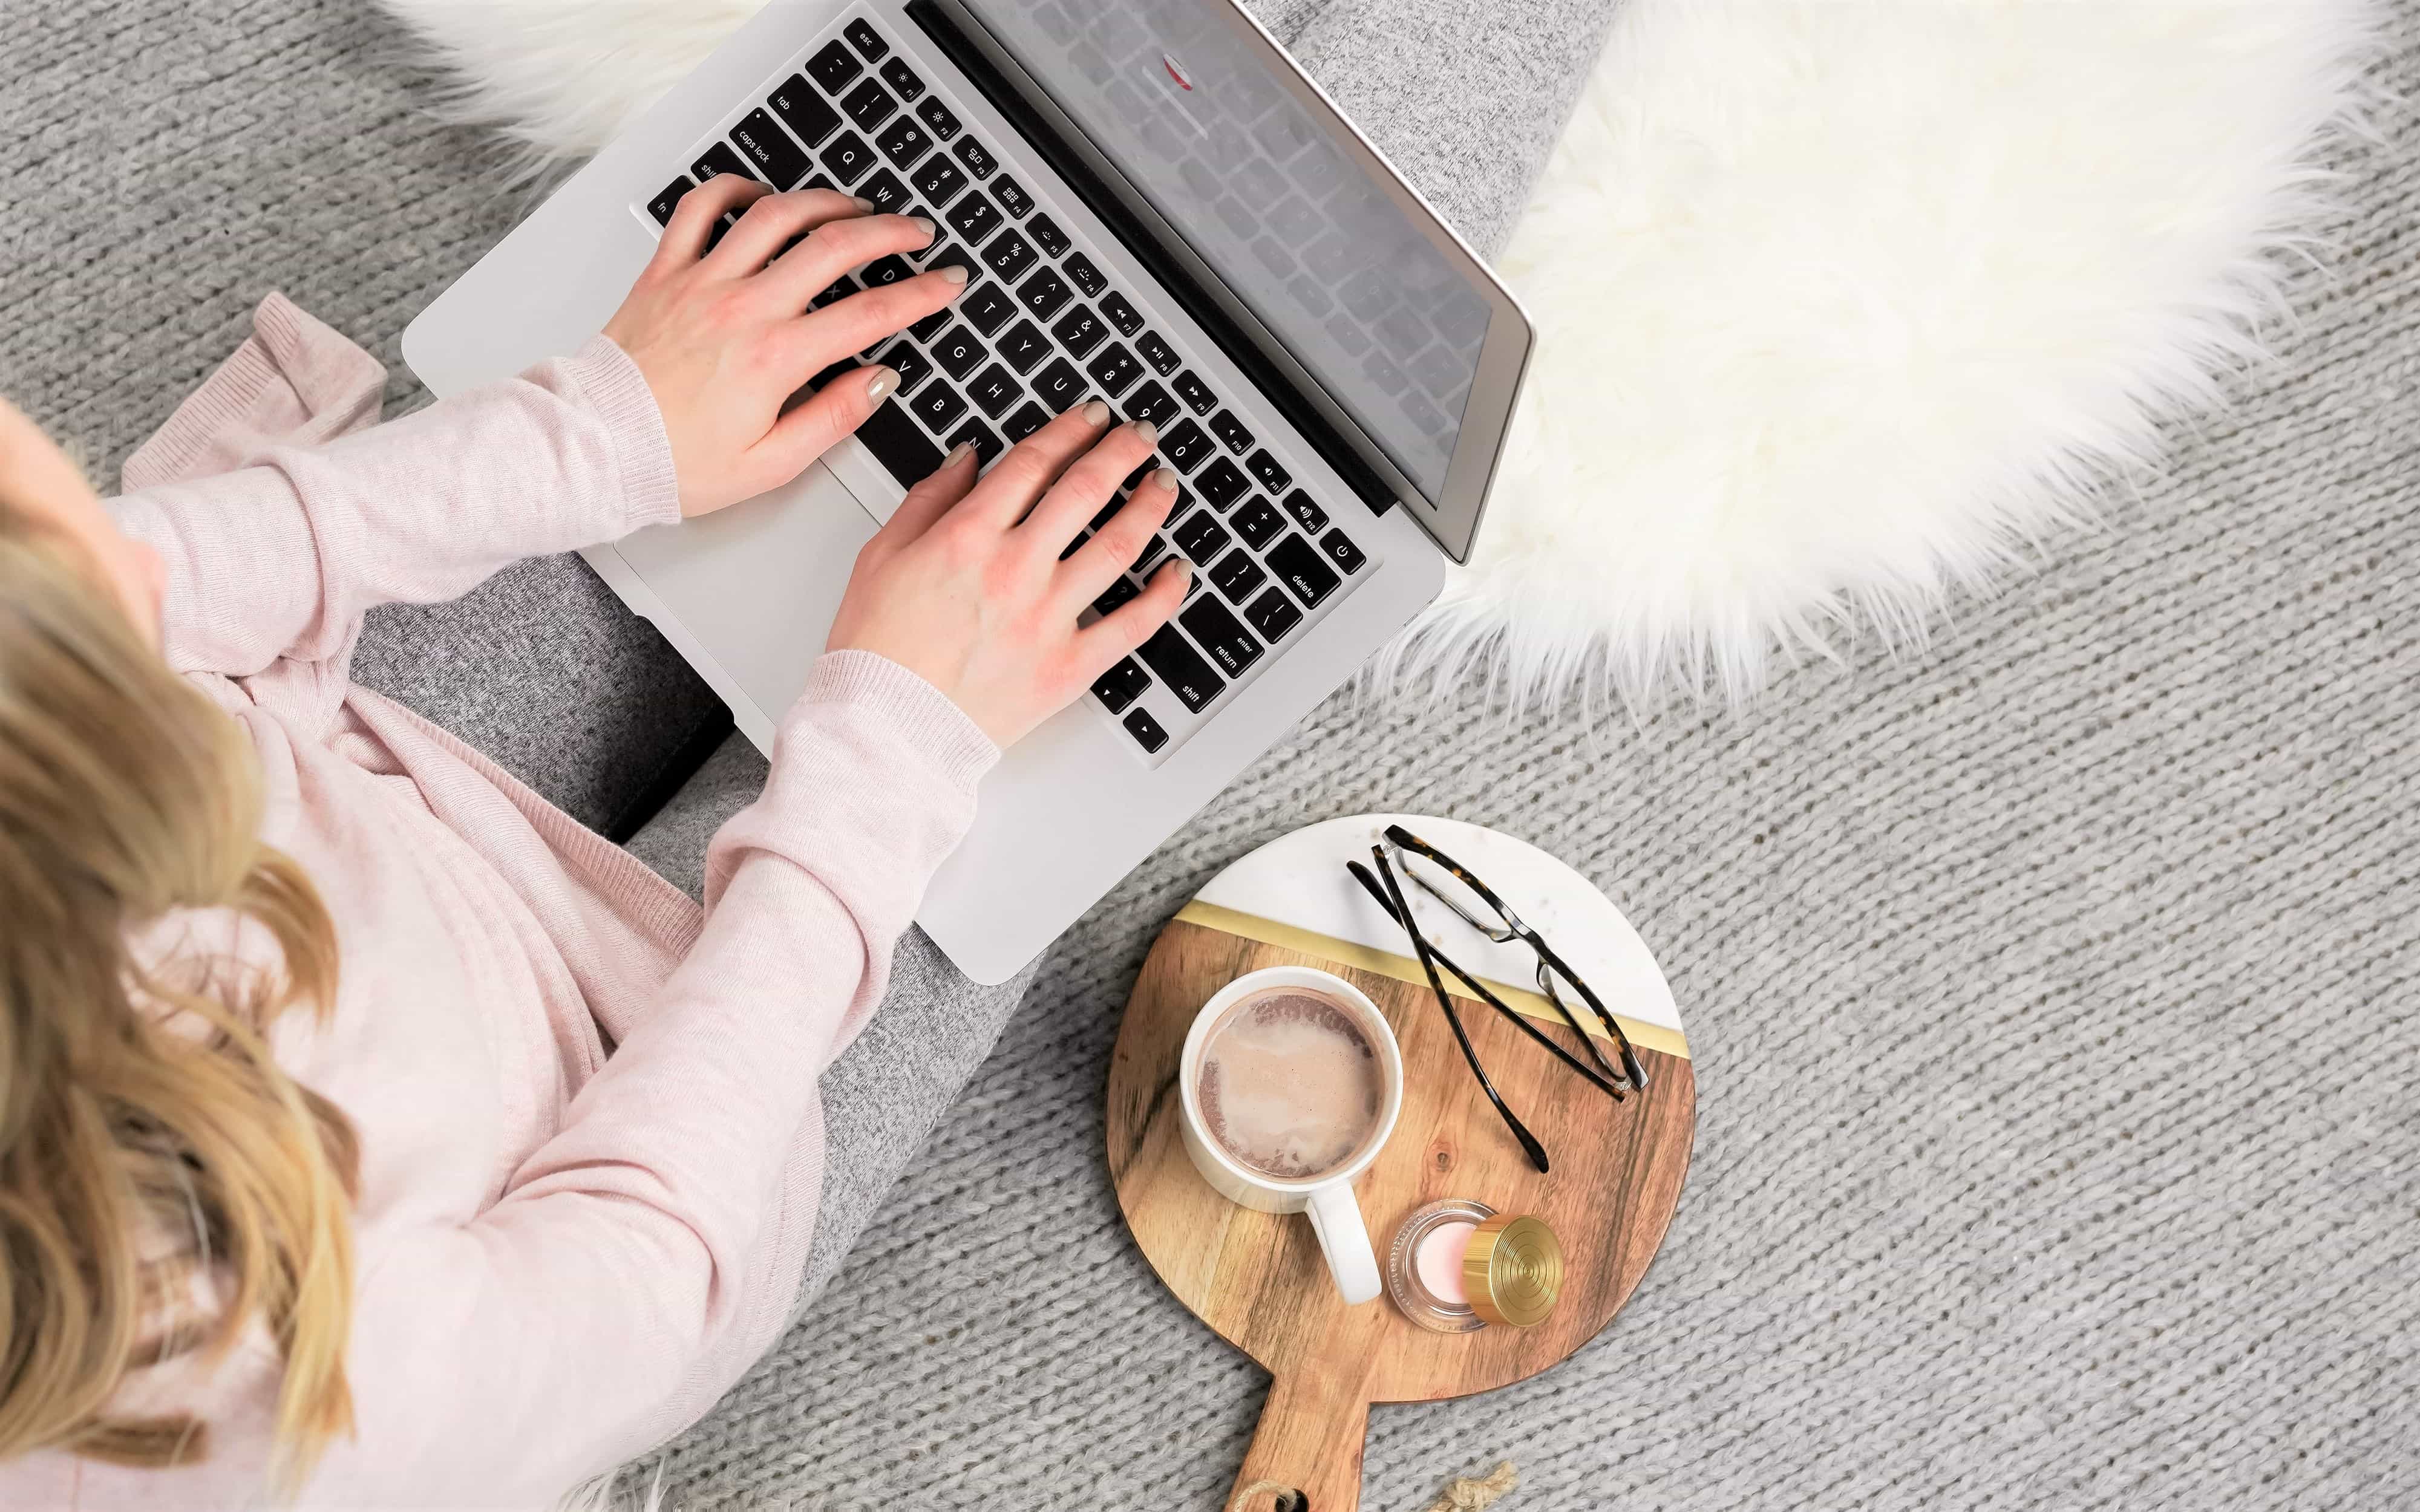 Is investing in a self-hosted blog really worth it? The answer is “YES!” Find out why here - 7 reasons to go self hosted with your blog. #bloggingtips #selfhostedblog #startablog